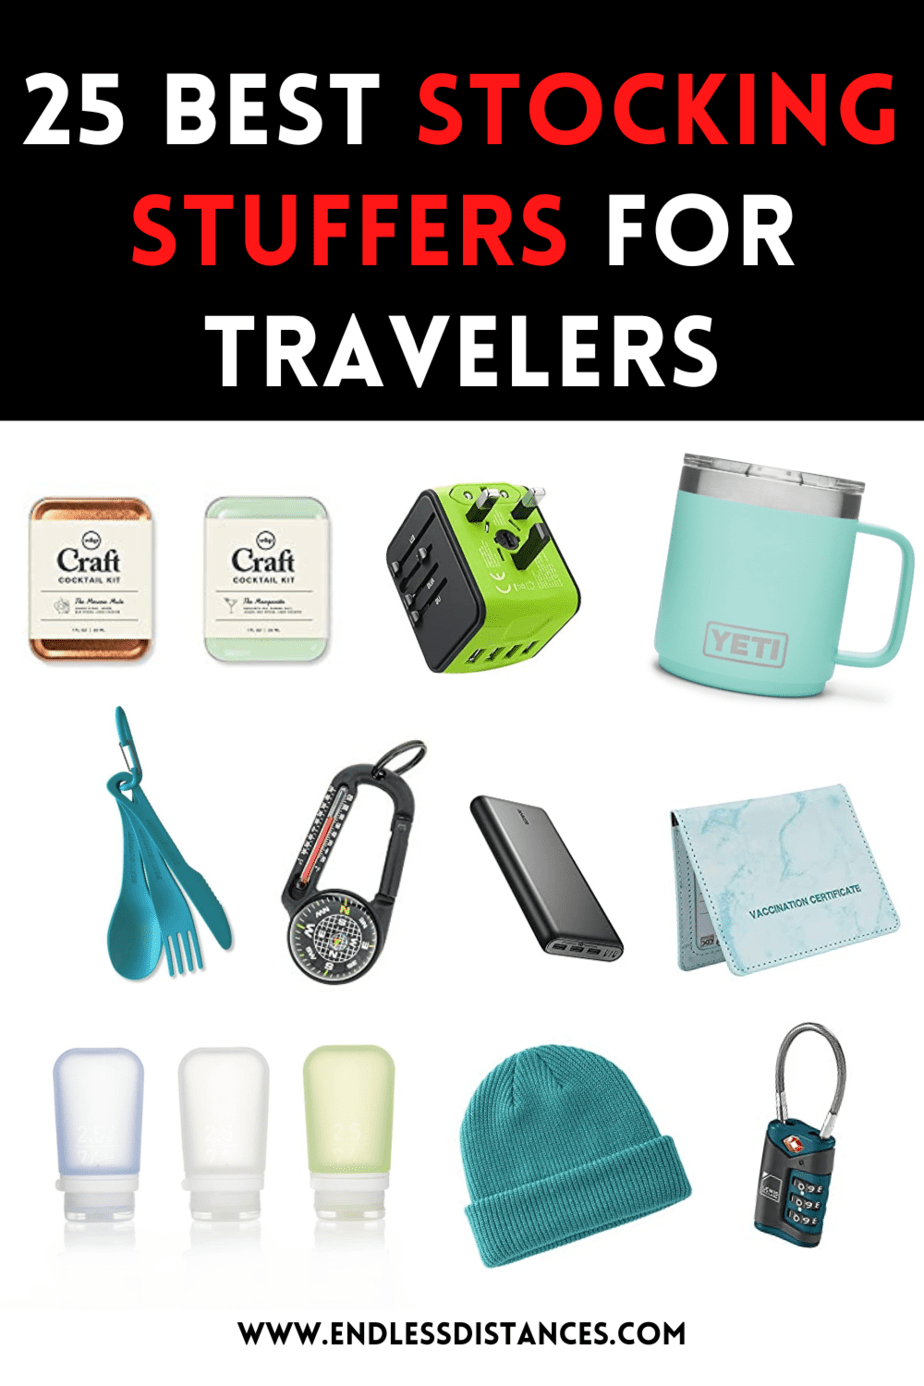 25 Holiday Gifts and Stocking Stuffers to Shop Right Now, Starting